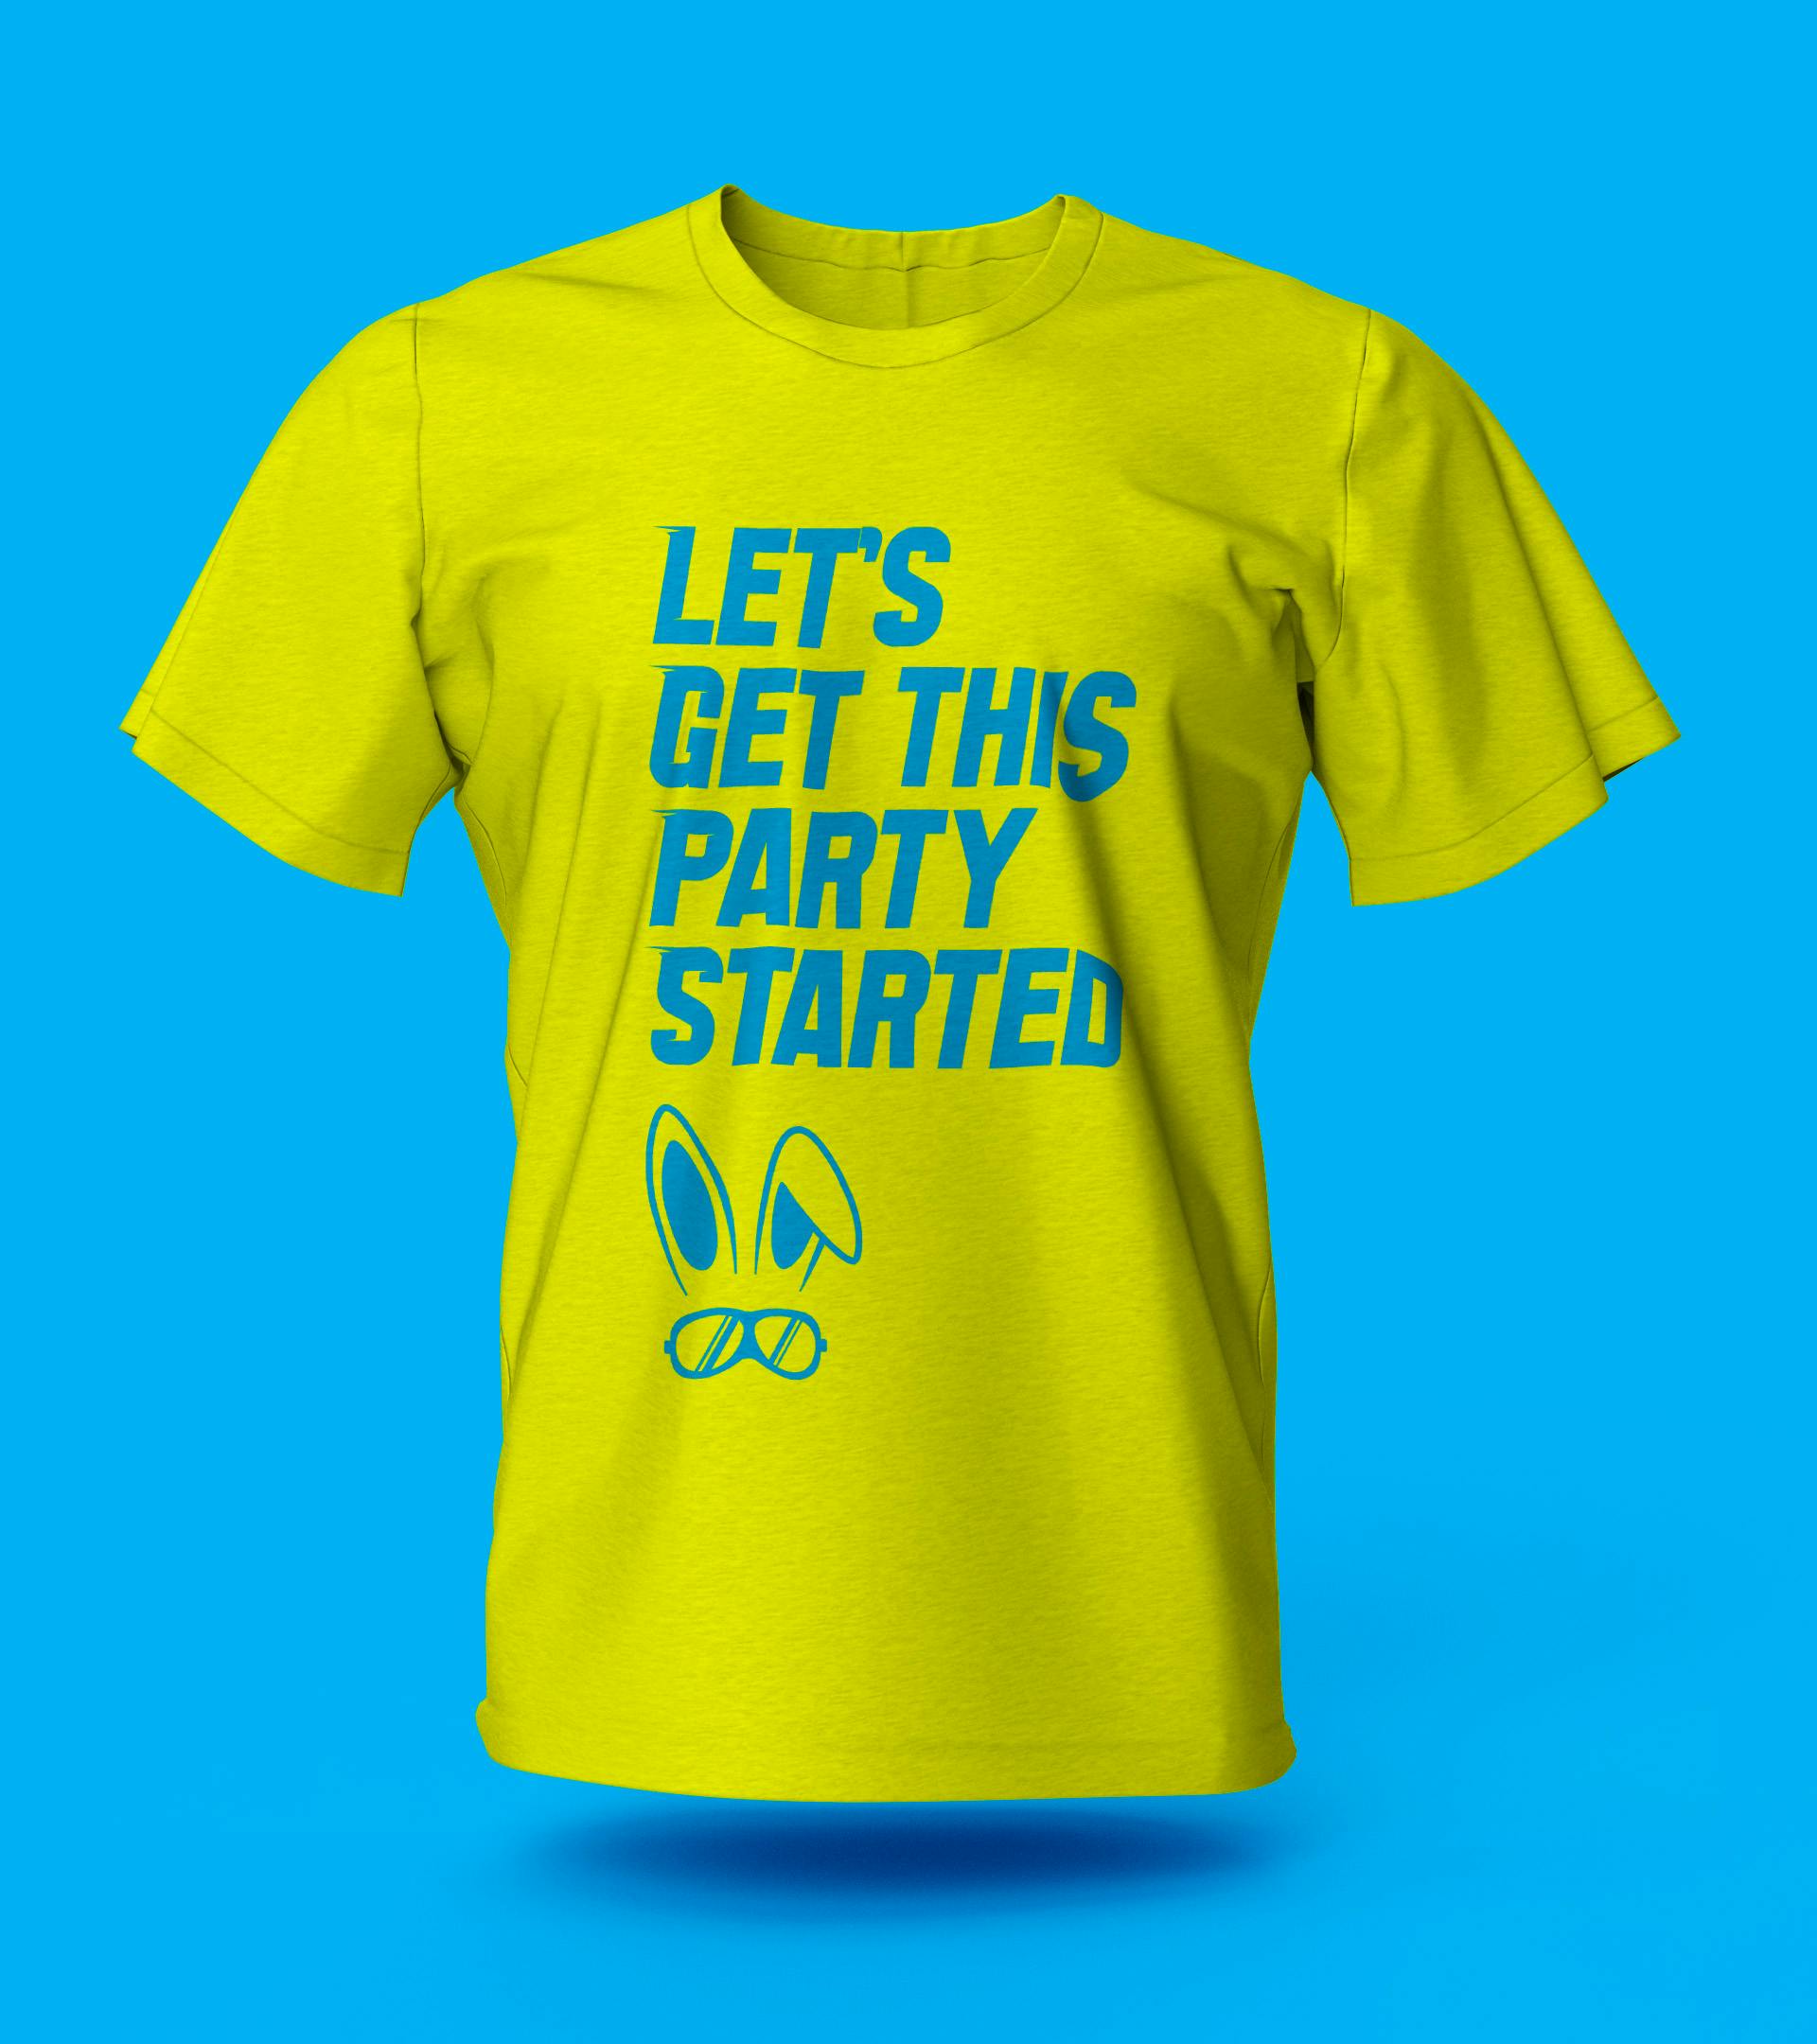 T-Shirt for Sonic Bunny that says "Let's get this party started"